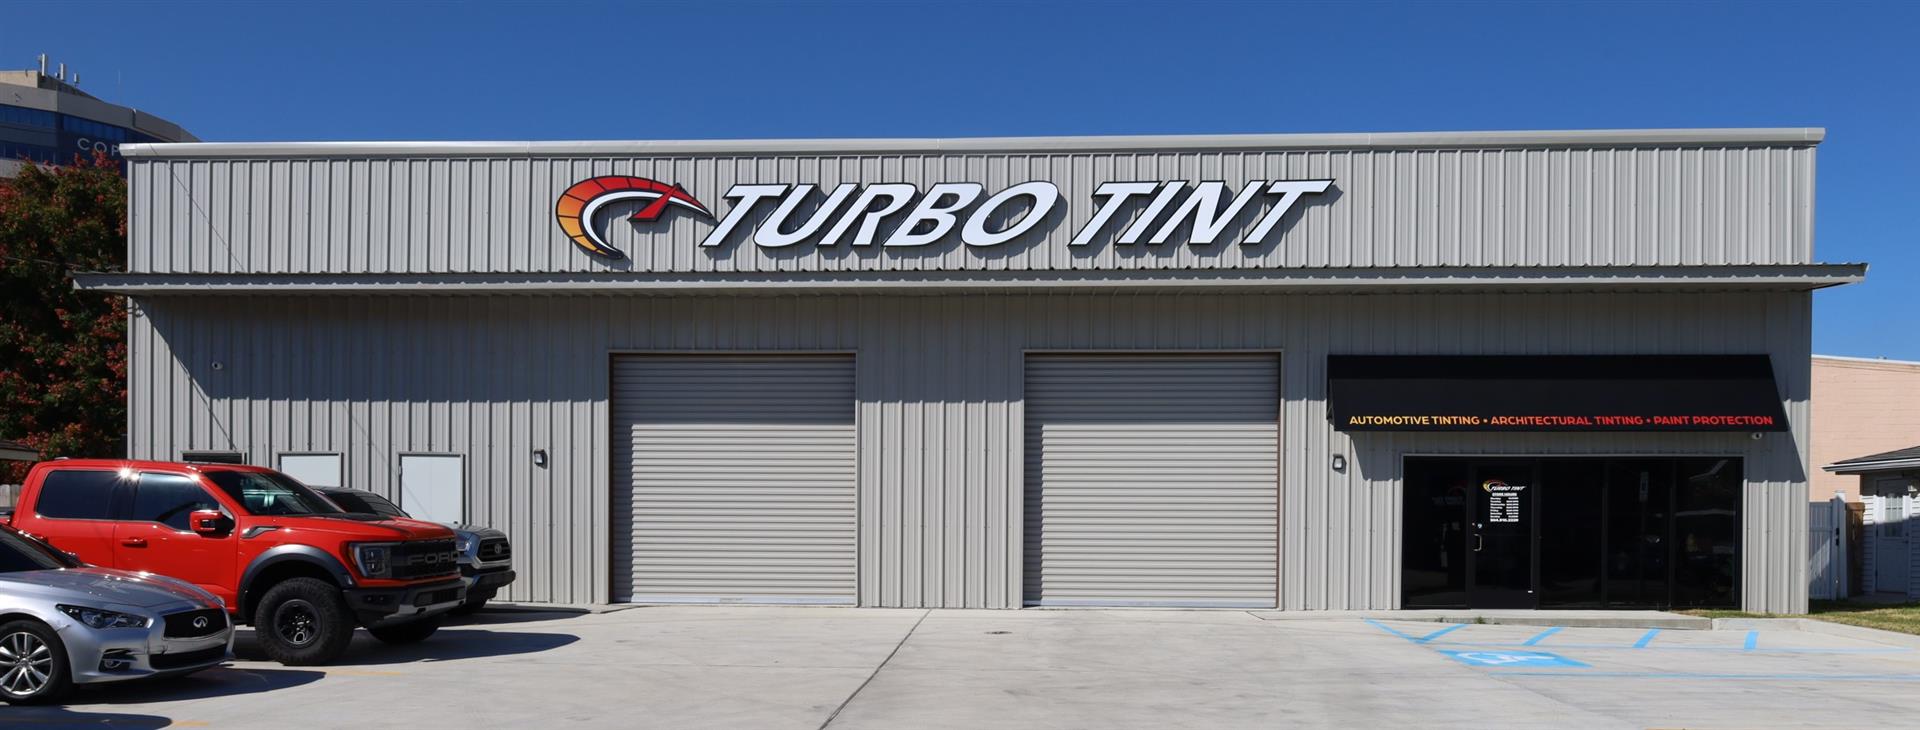 Tire Pro Fulfills Entrepreneurial Dream With Louisiana’s First Turbo Tint Location